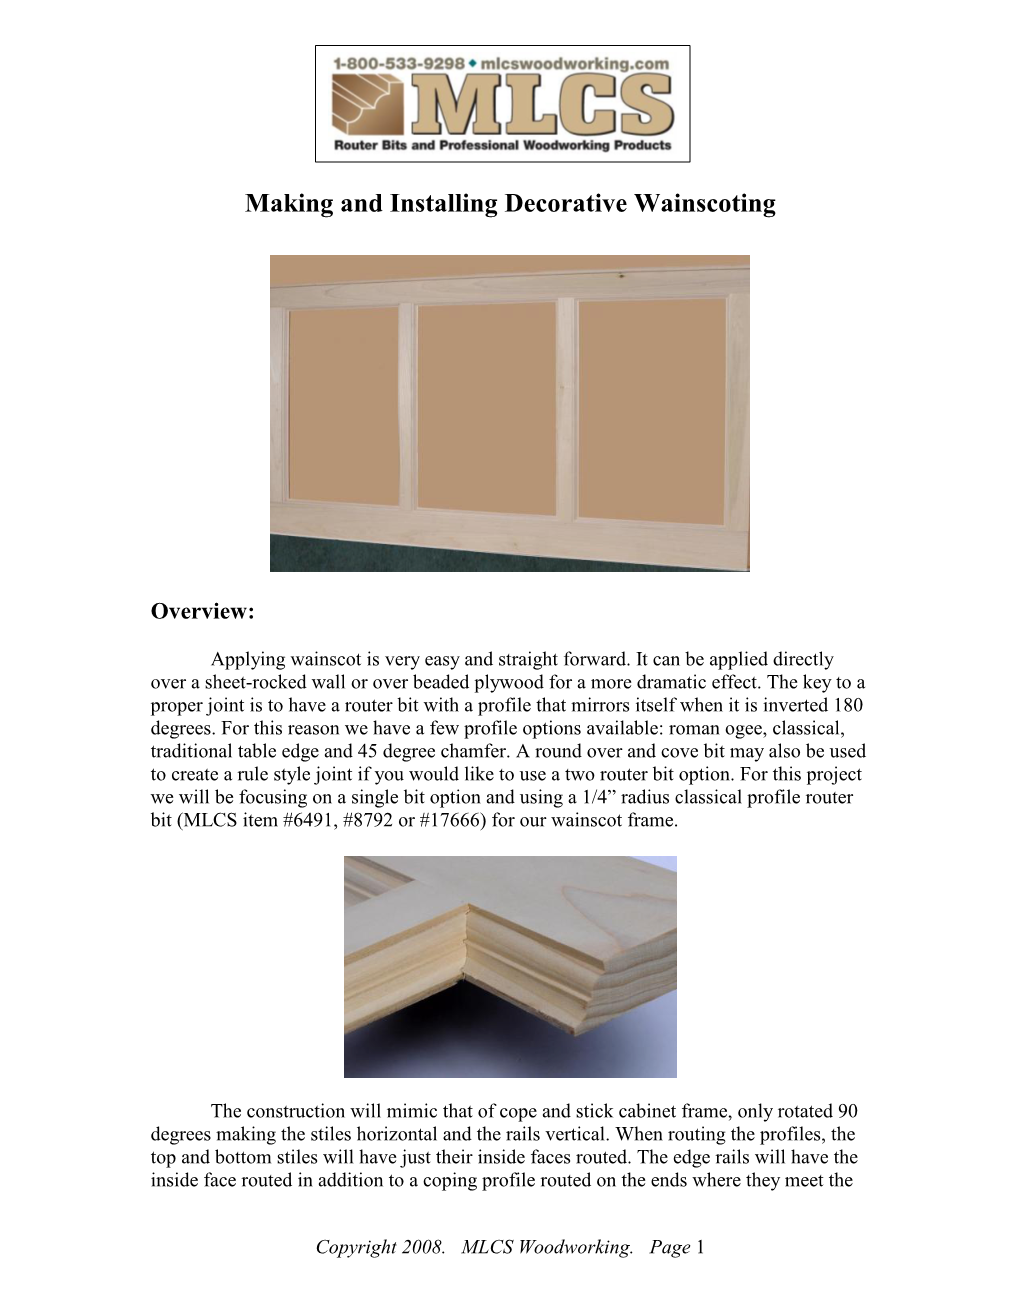 Making and Installing Decorative Wainscoting